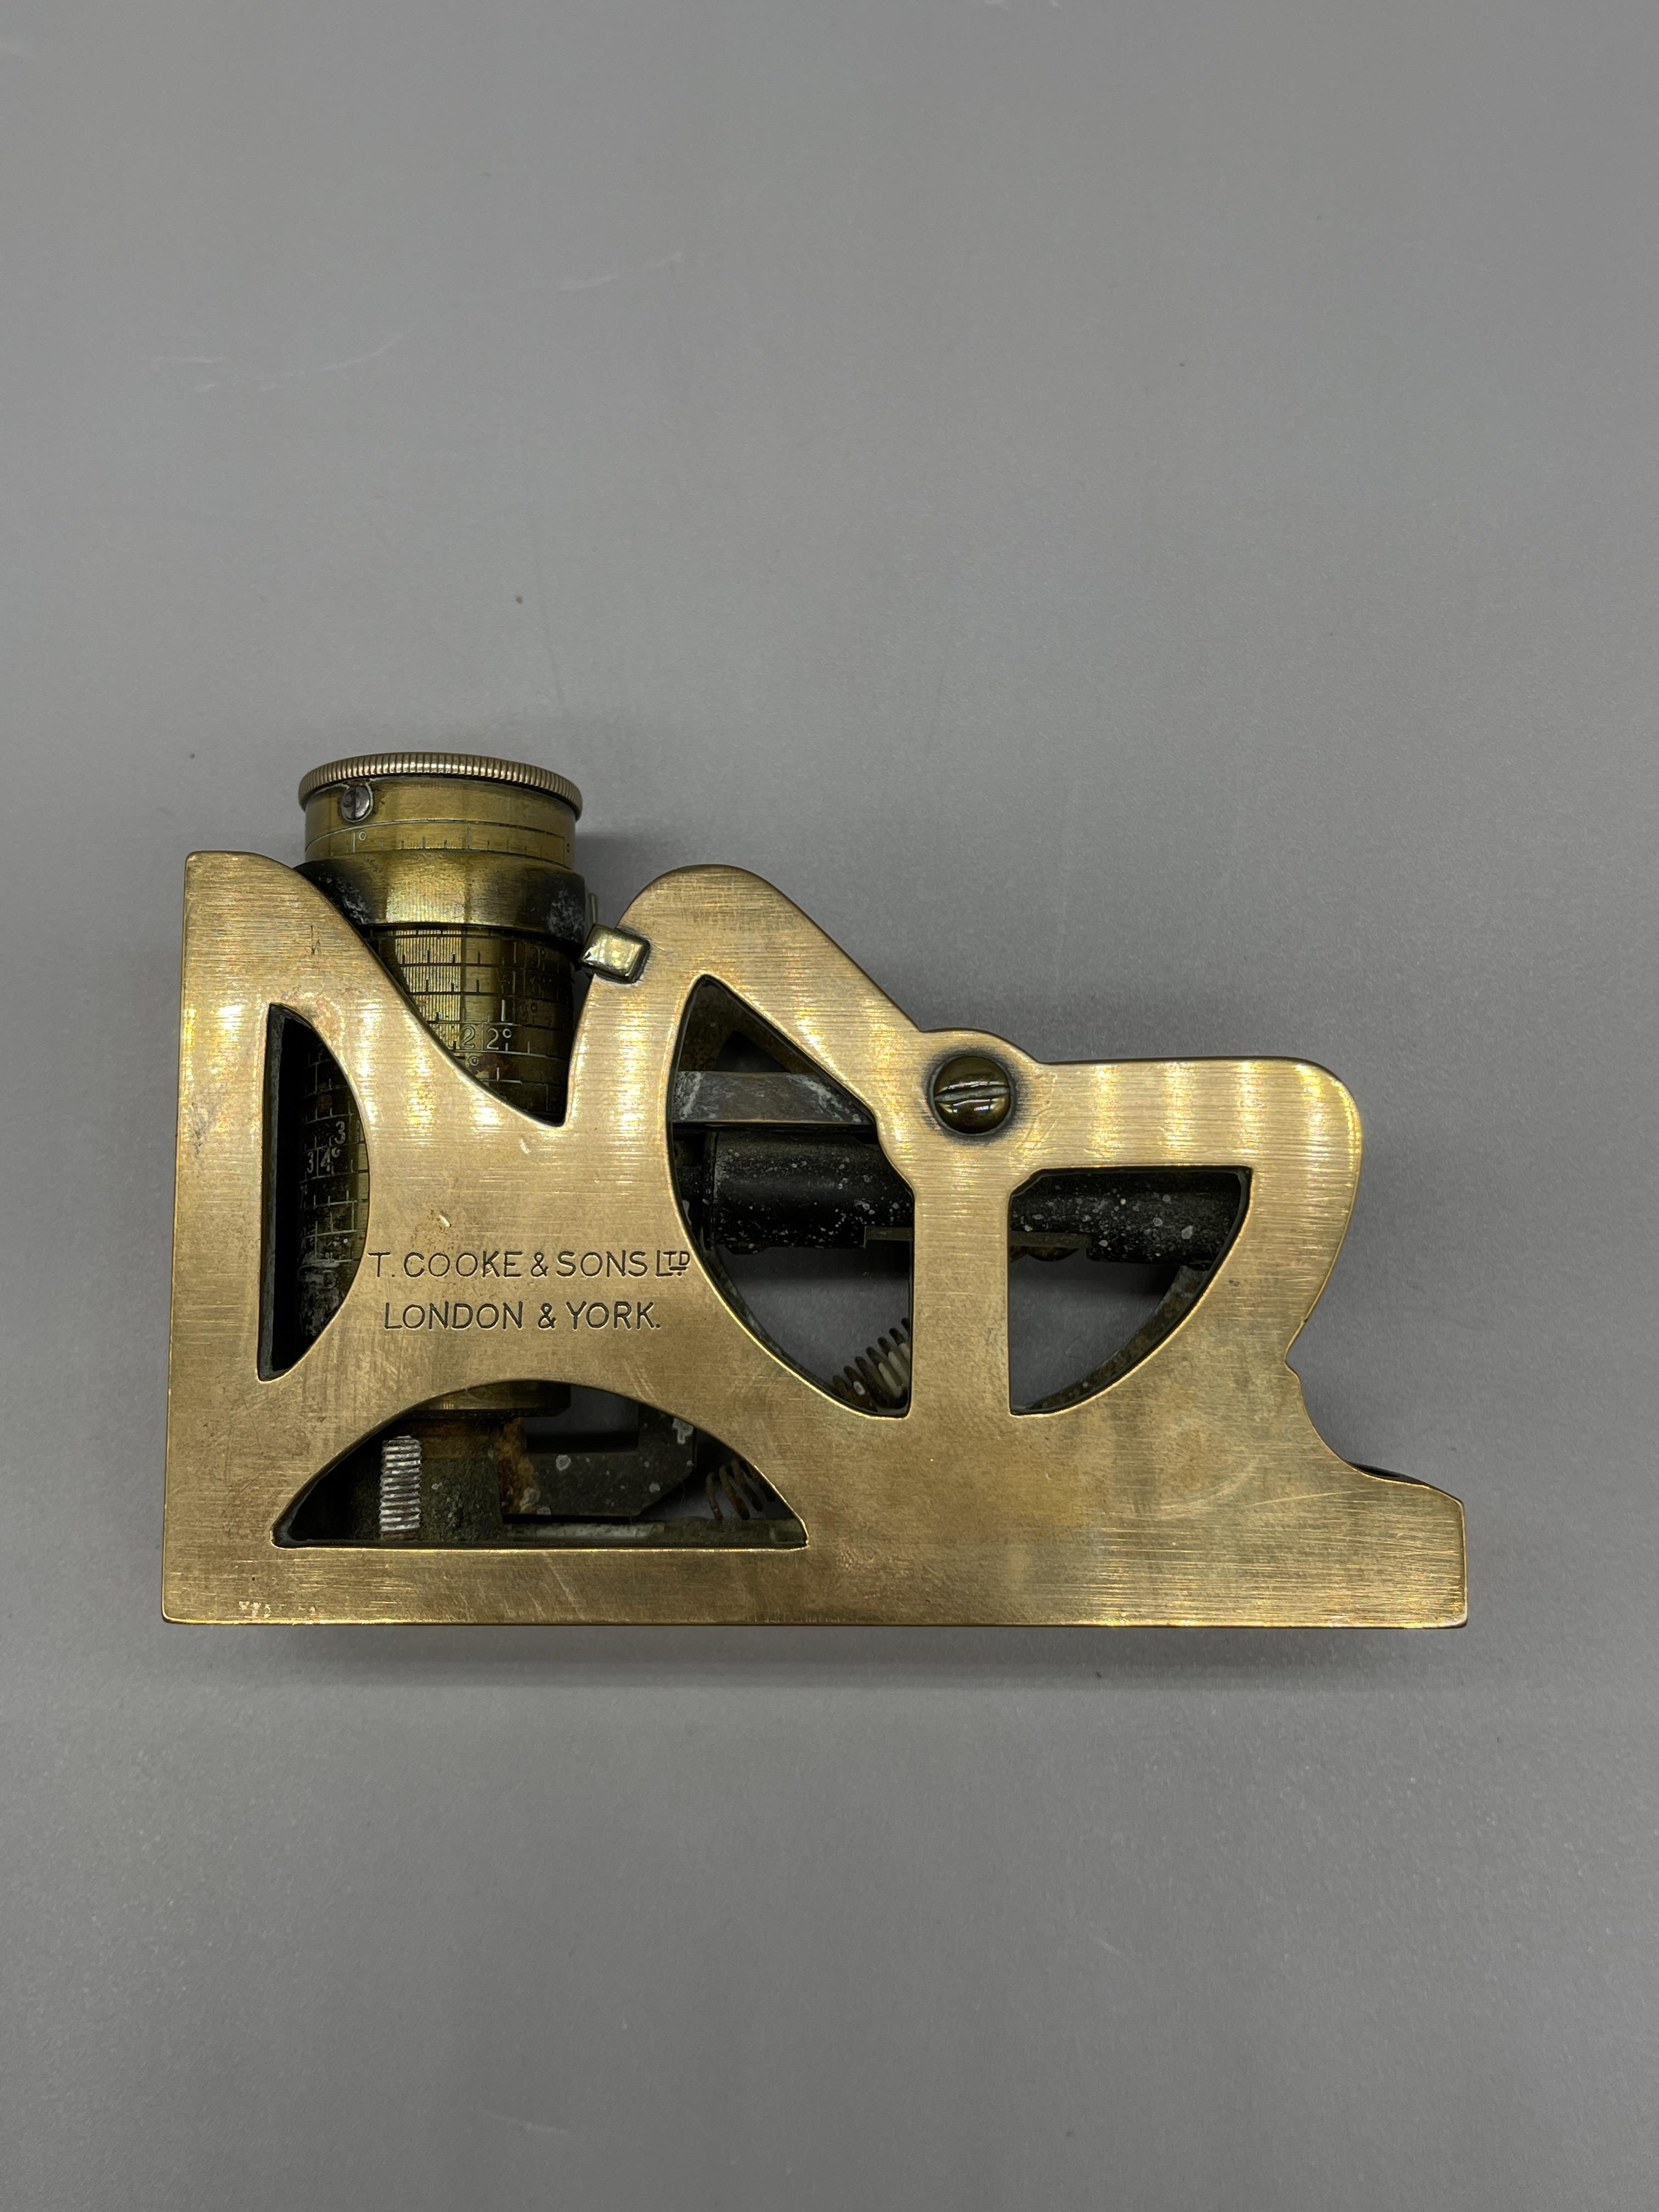 Leathercased T.Cooke&Sons Architects Tool - Image 2 of 5